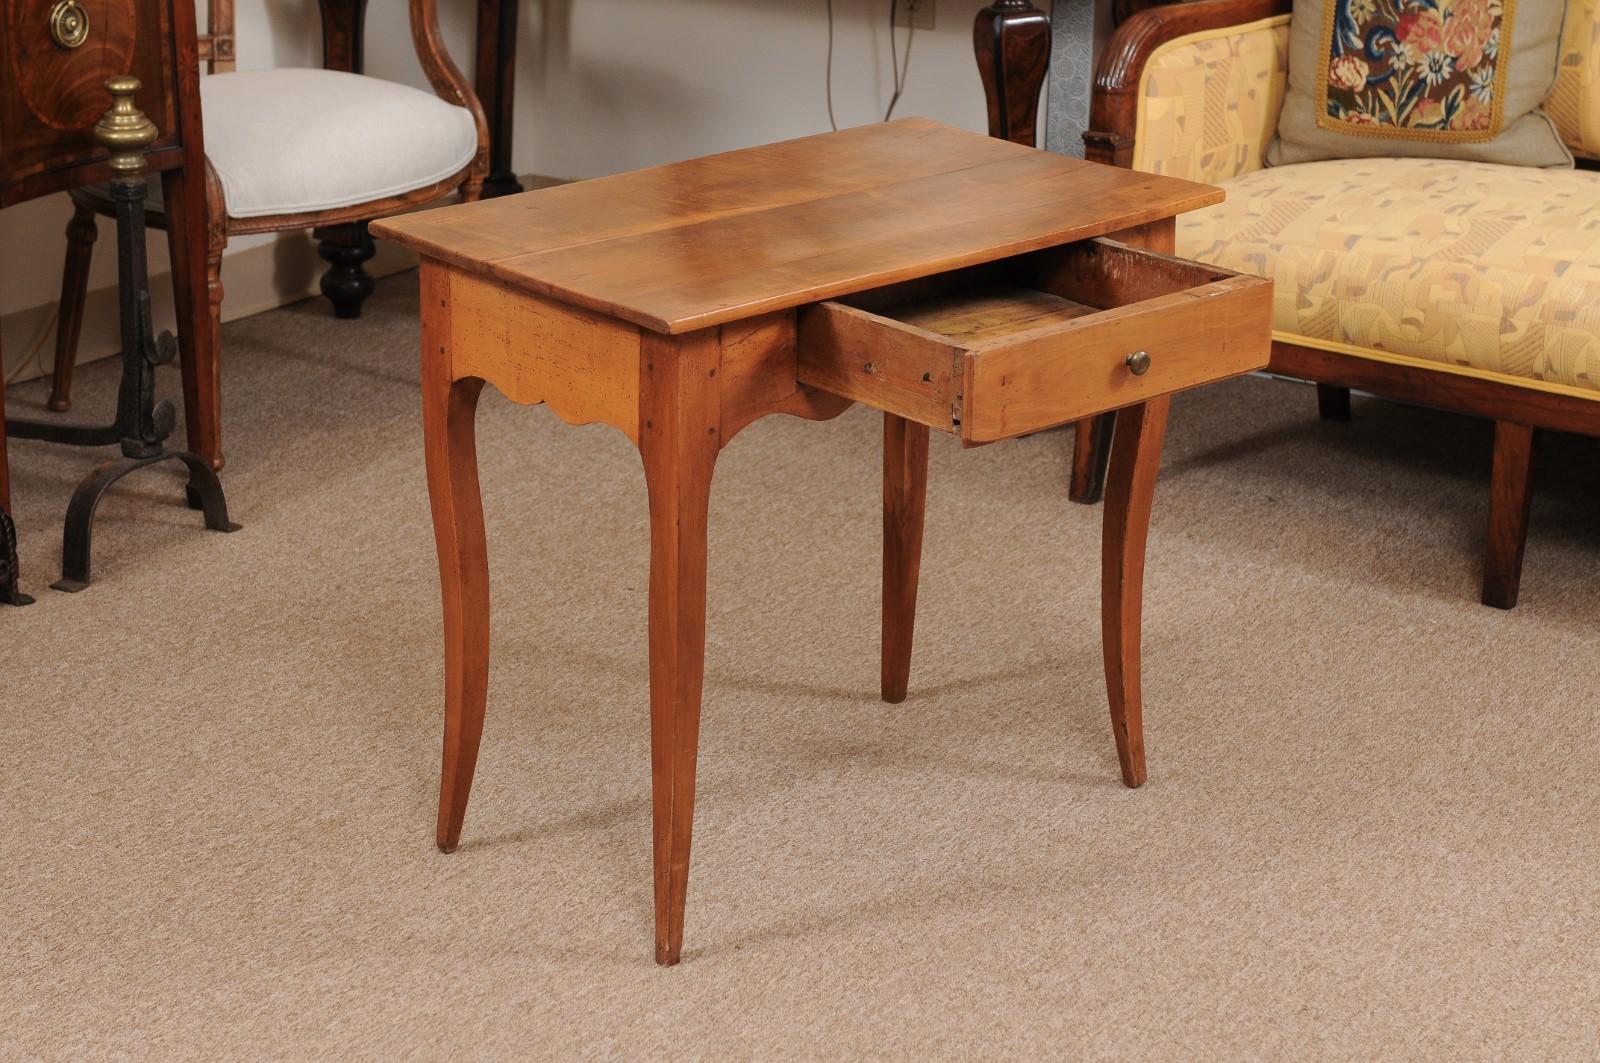 Louis XV Style Fruitwood Side Table with Drawer, 19th Century France For Sale 2